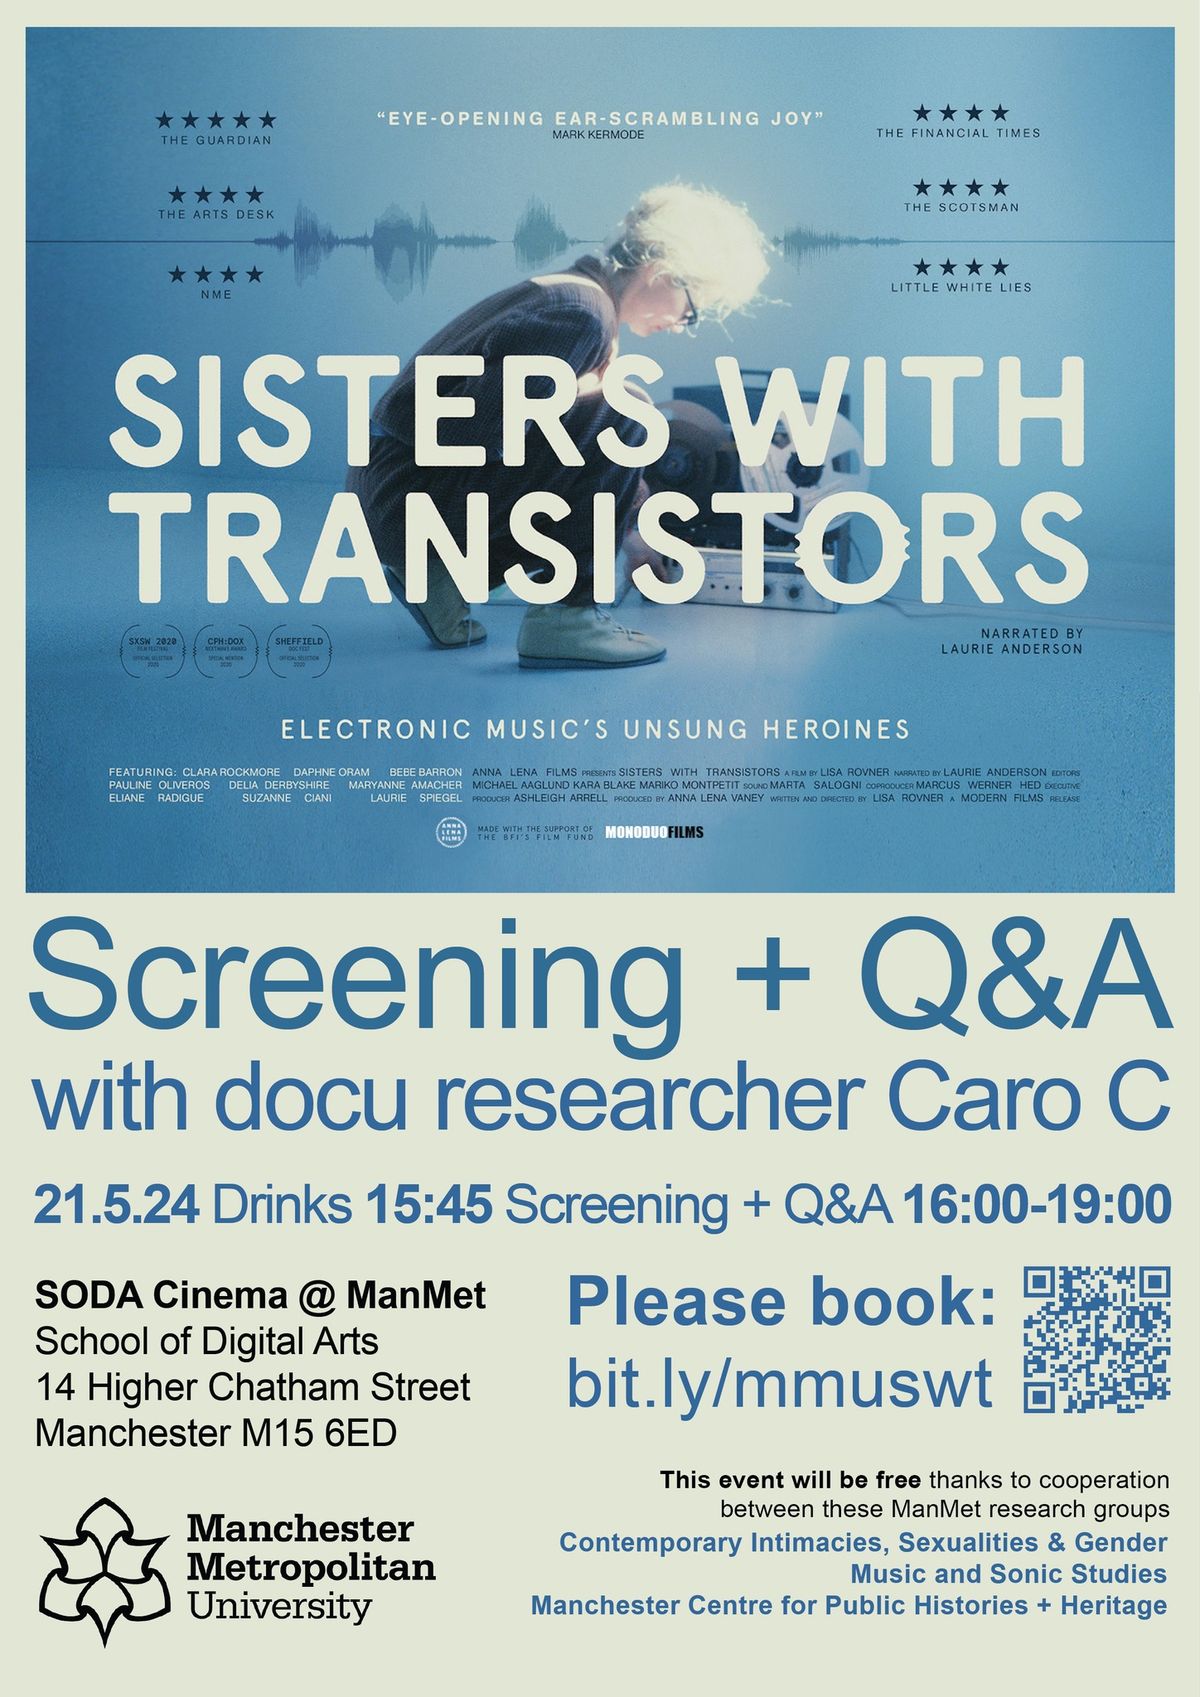 Sisters with Transistors film screening and discussion.